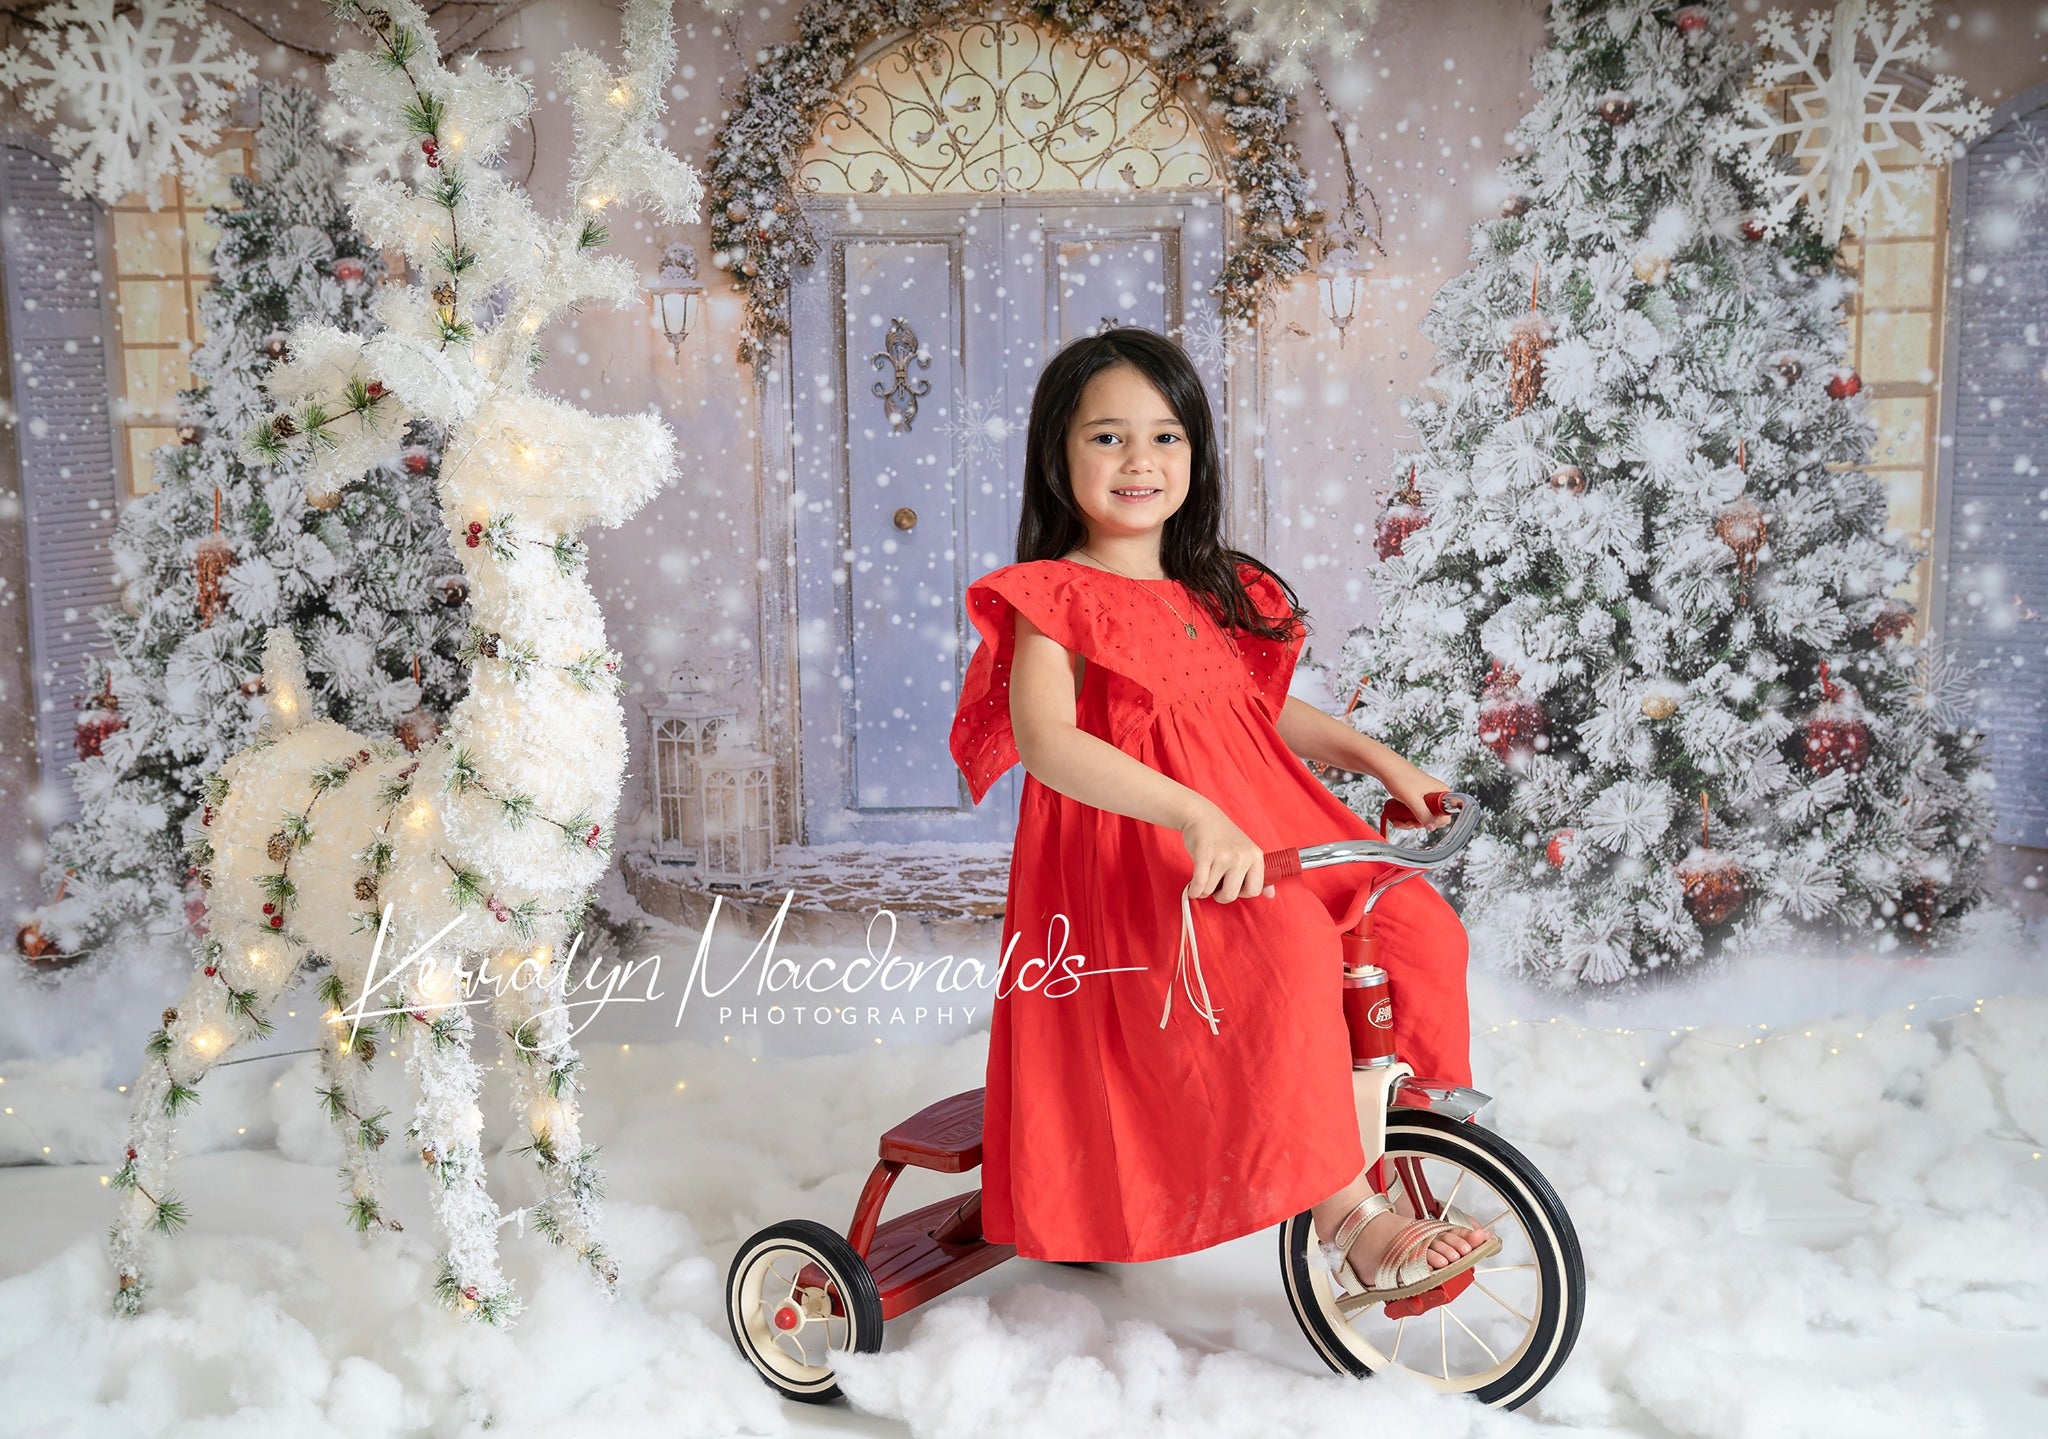 Kate Christmas Door Front Snow Backdrop for Photography